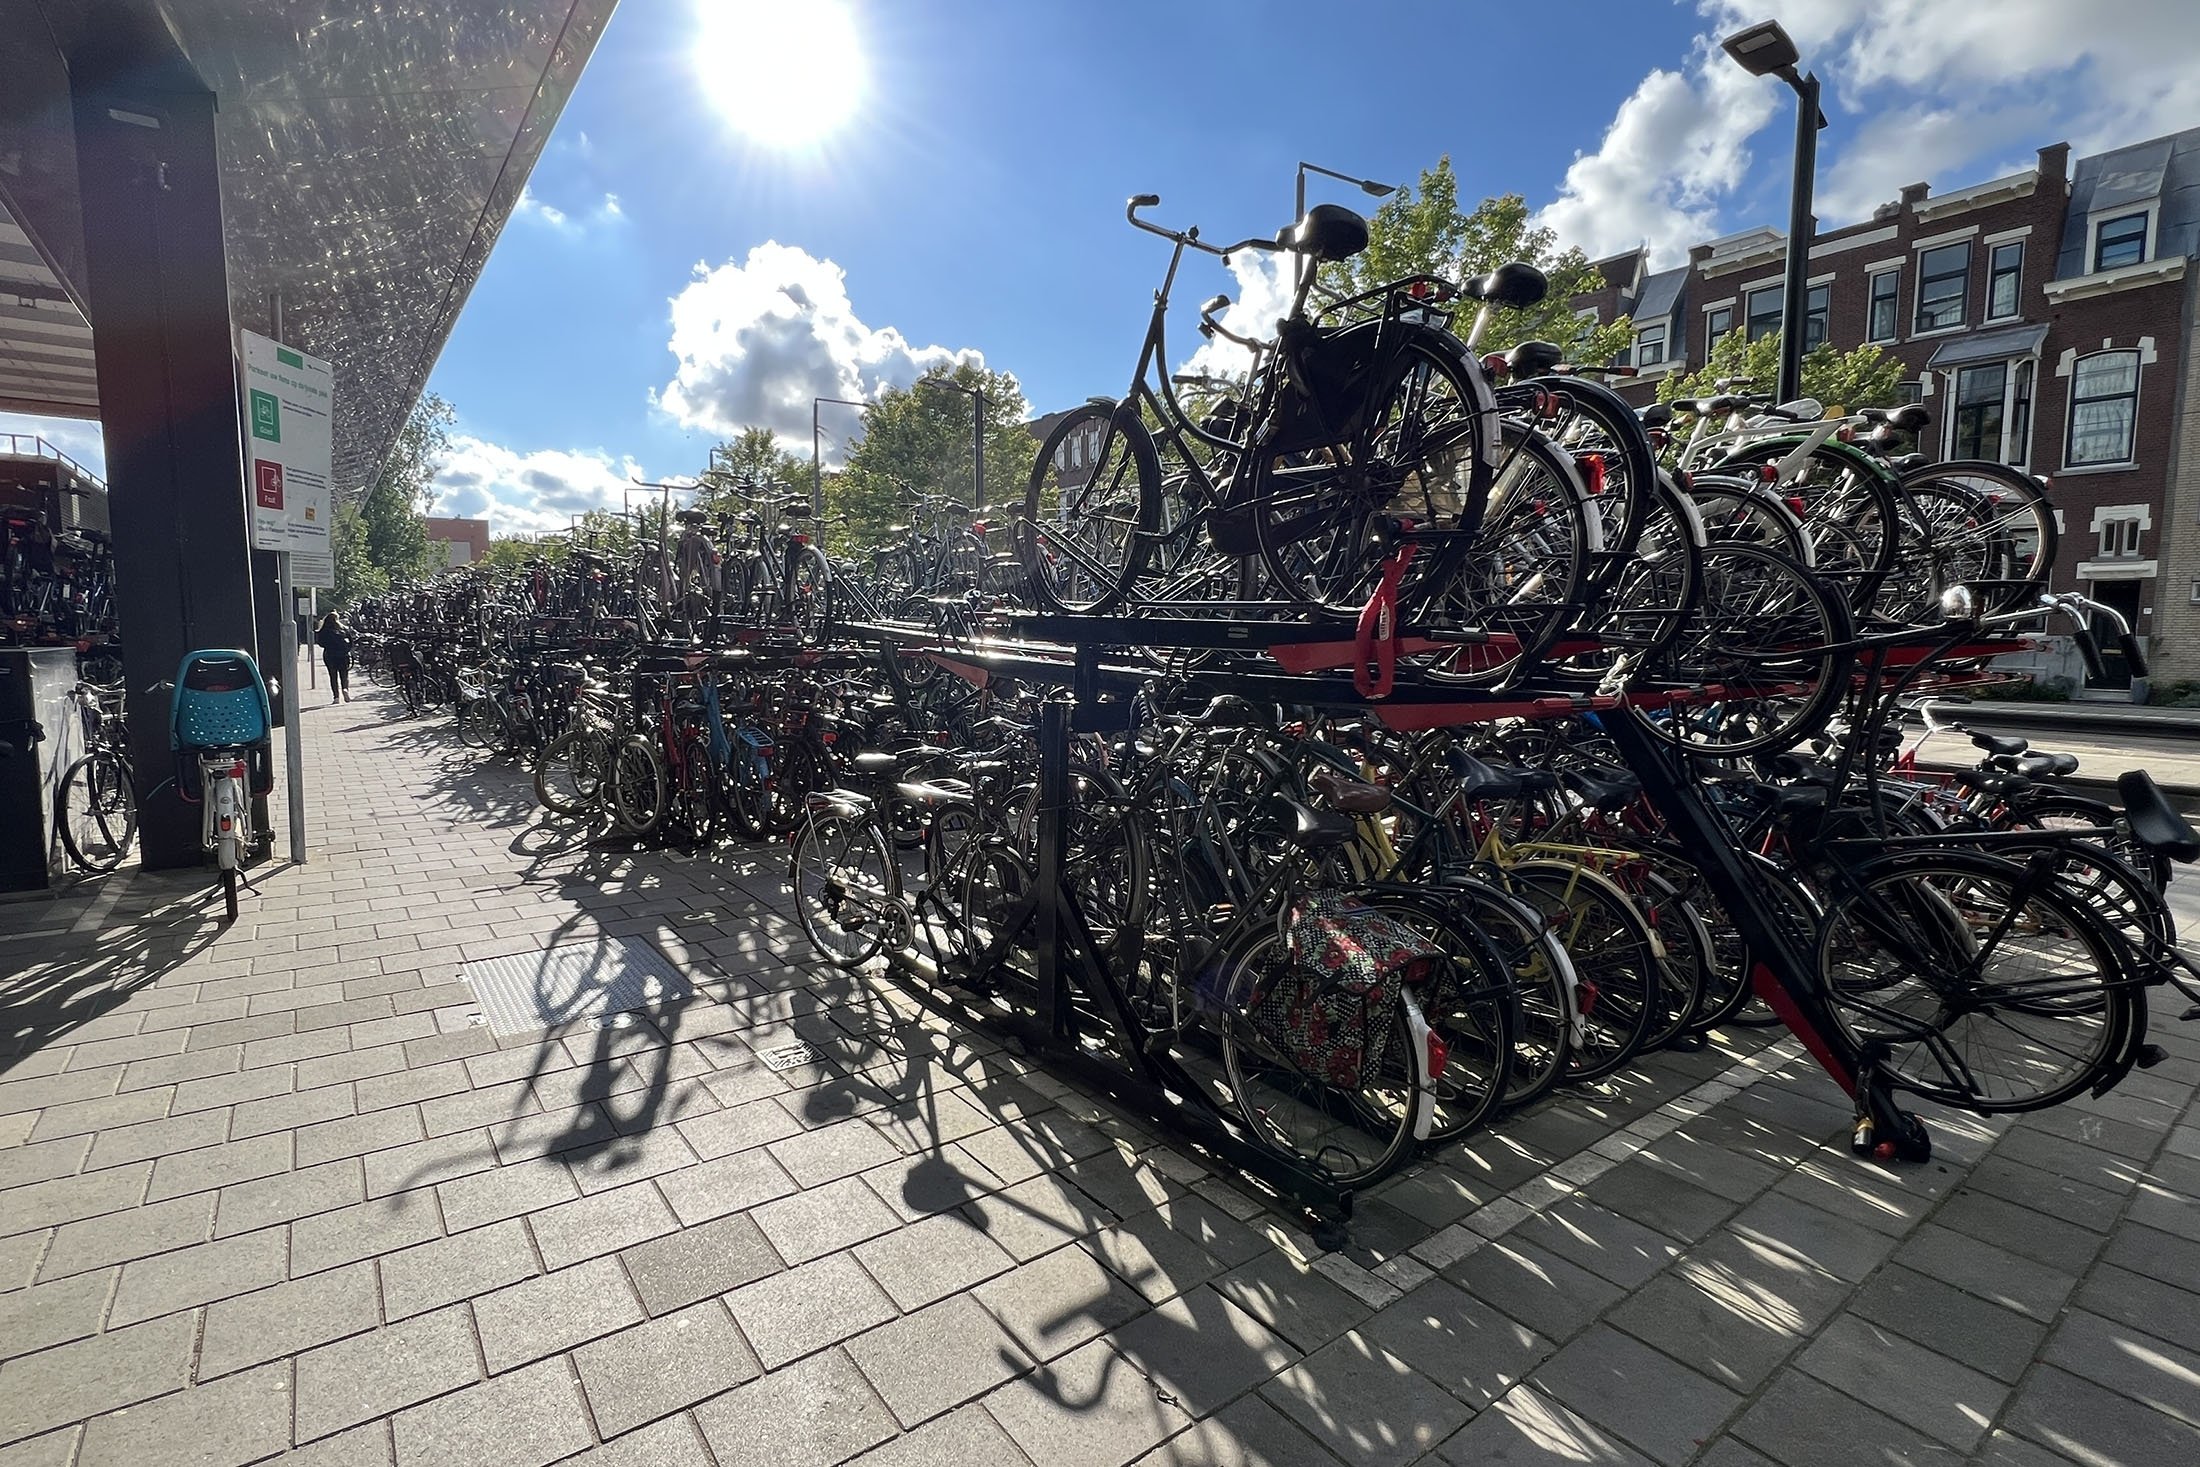 A bicycle parking lot in Utrecht, the Netherlands, June 2, 2022. (AA Photo)